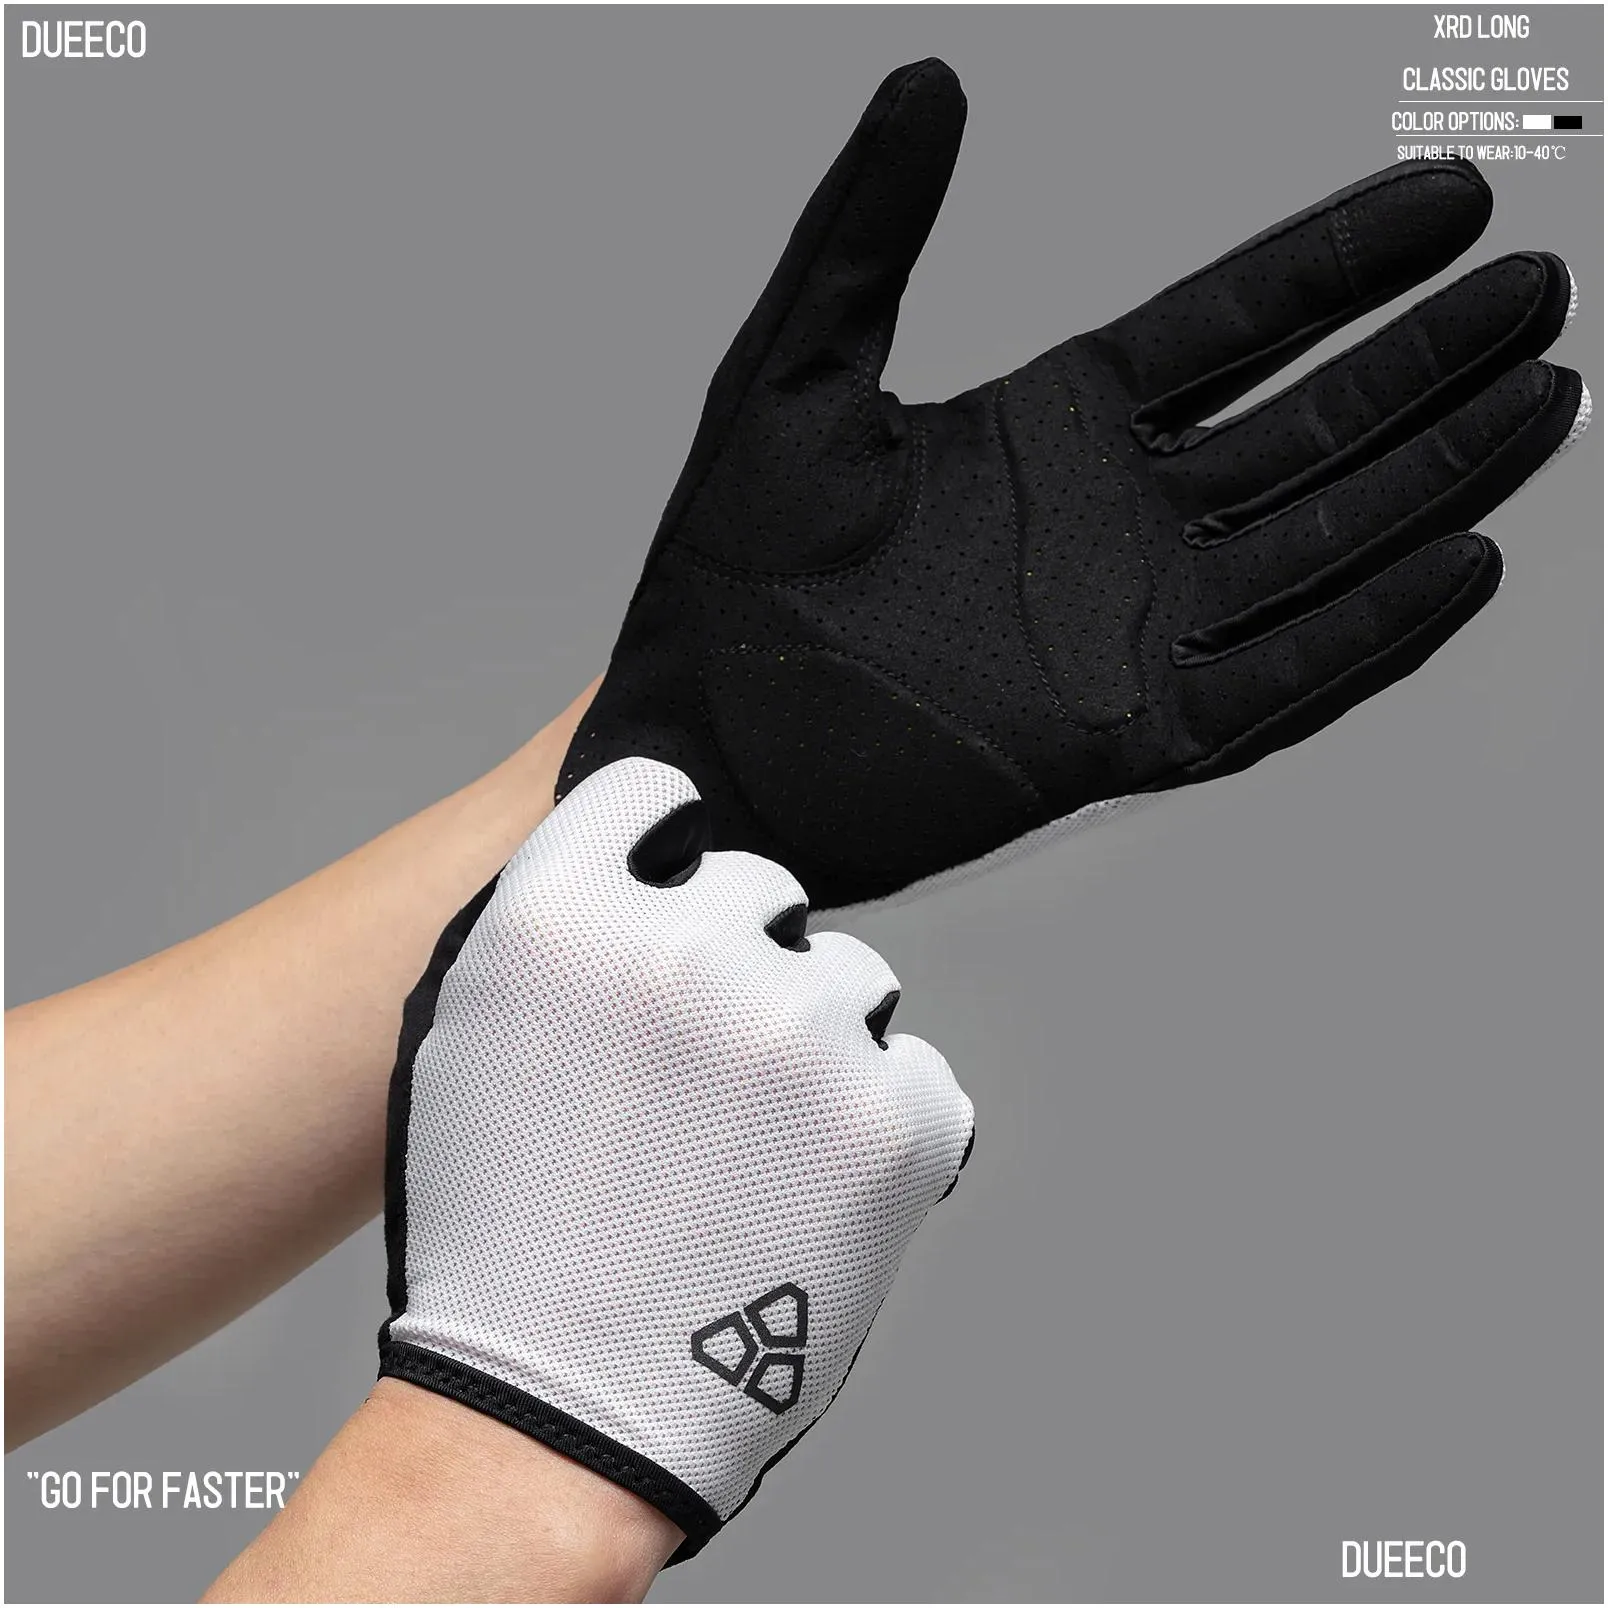 Cycling Gloves Dueeco Fl Finger Bicycle Mountain Bike Glovesxrd Paded With Shock Absorbing Antislip Mtb Drop Delivery Dh2G8